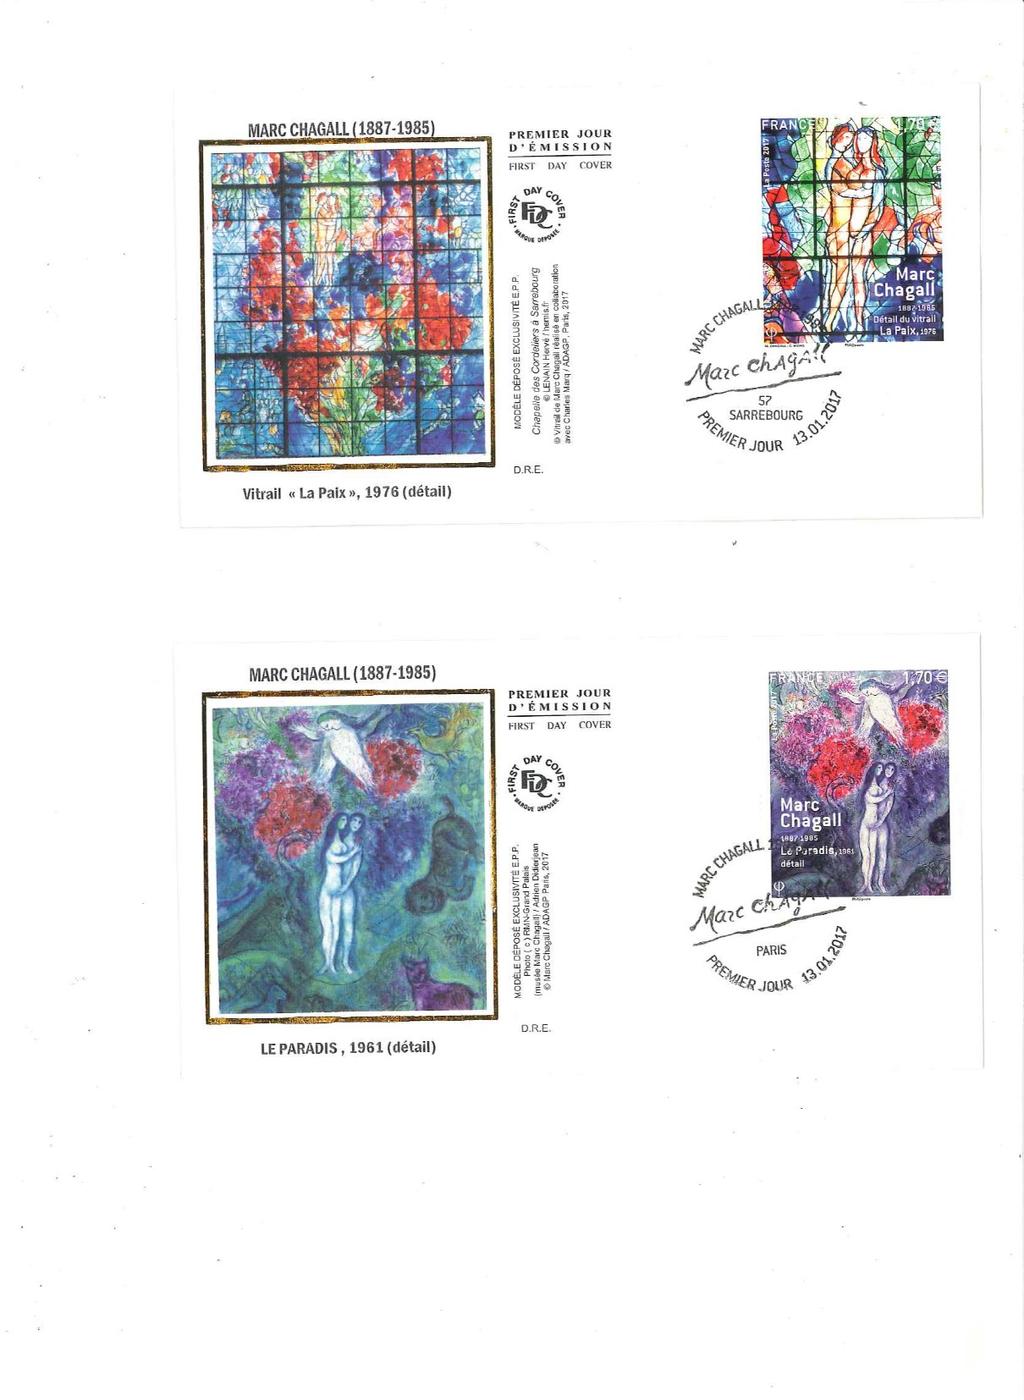 MARK CHAGALL ISSUE BY FRANCE REPORTED BY GARY S.